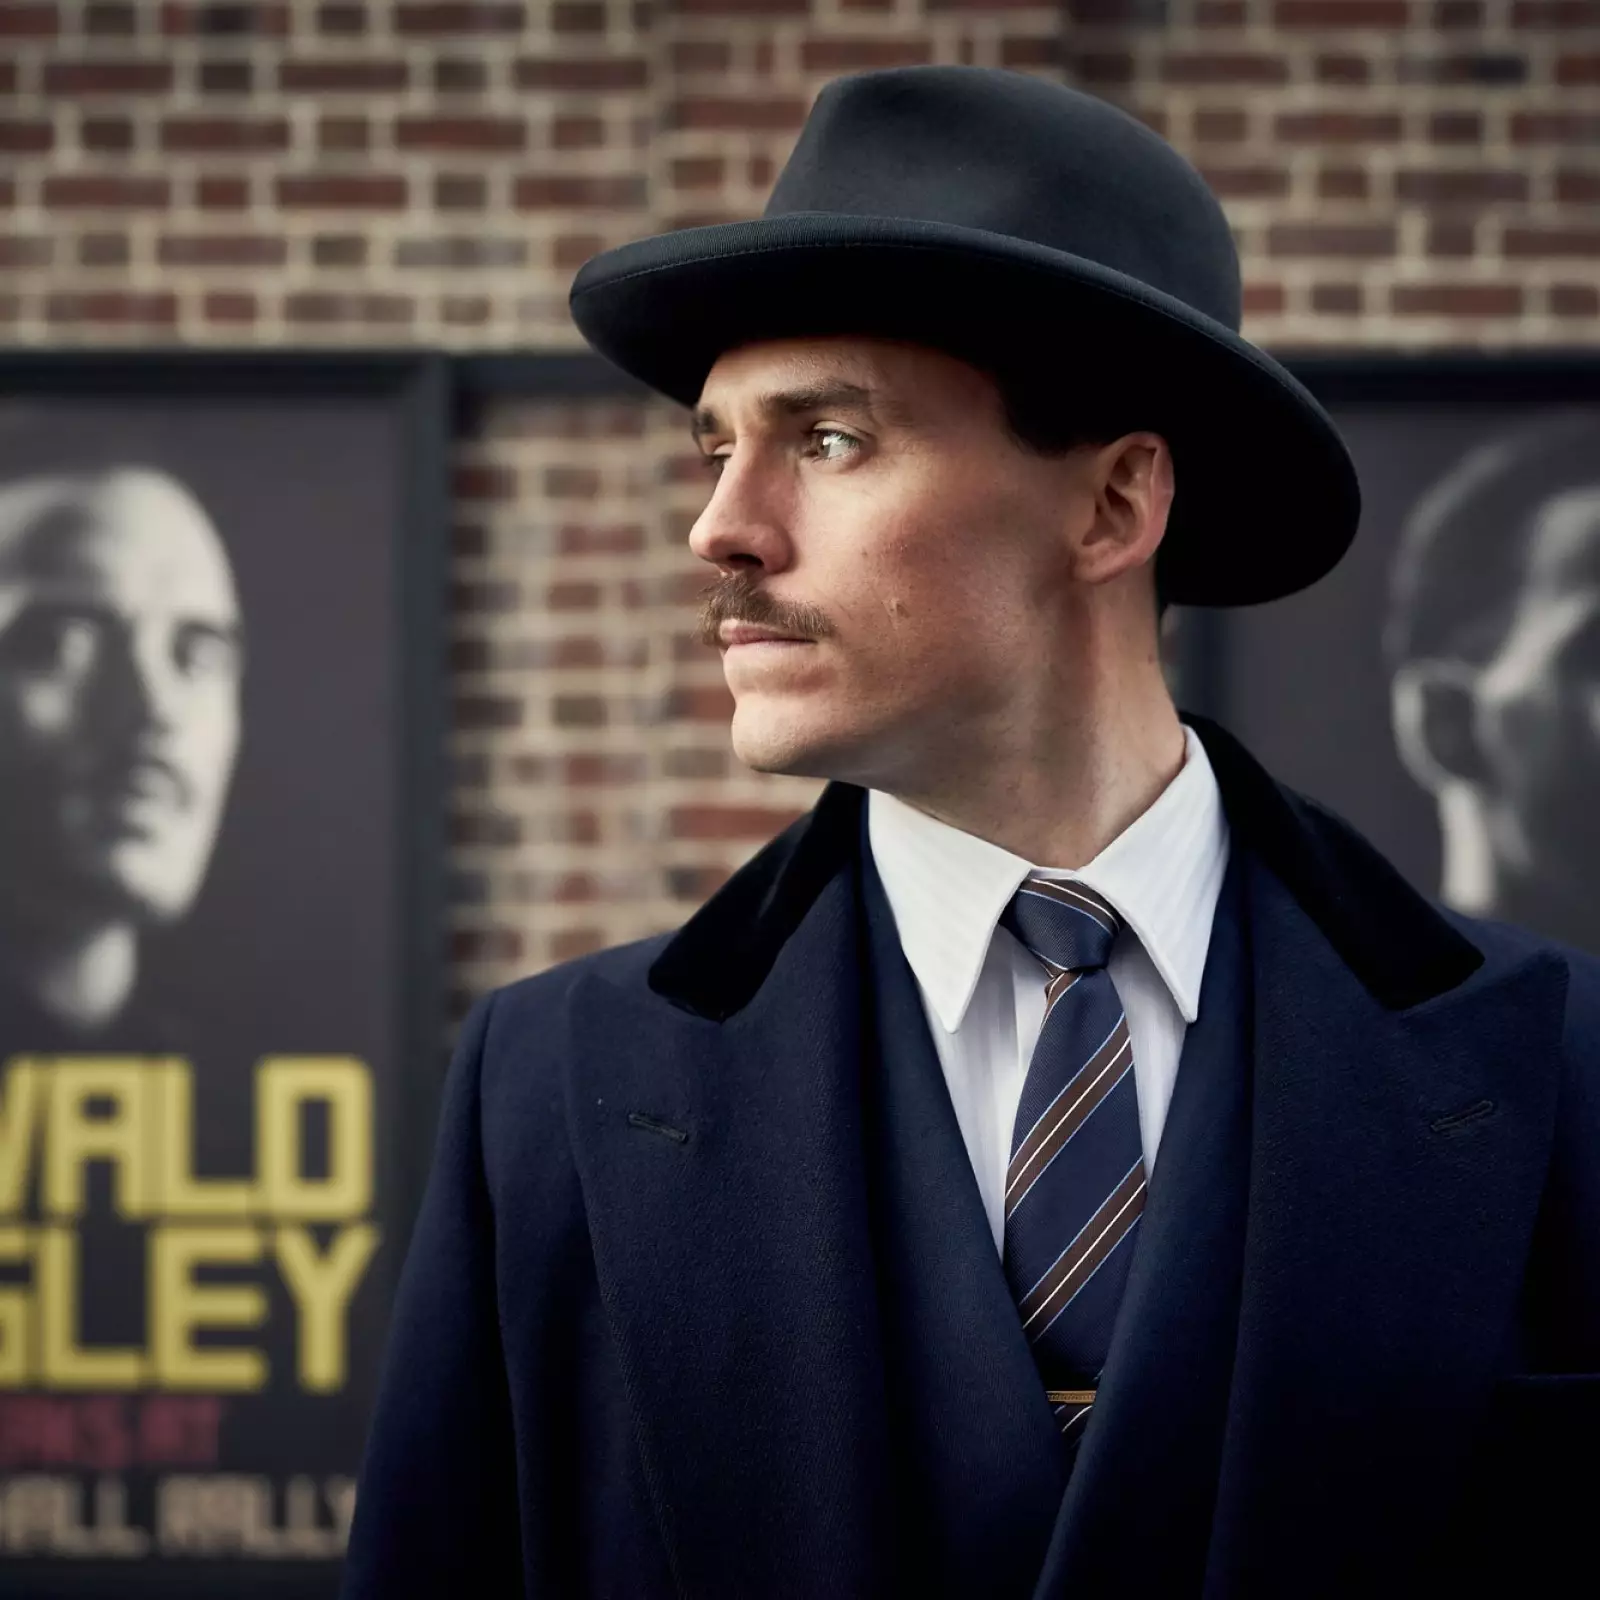 Oswald Moseley, played by Sam Claflin, is Tommy's new fascist enemy in the season (